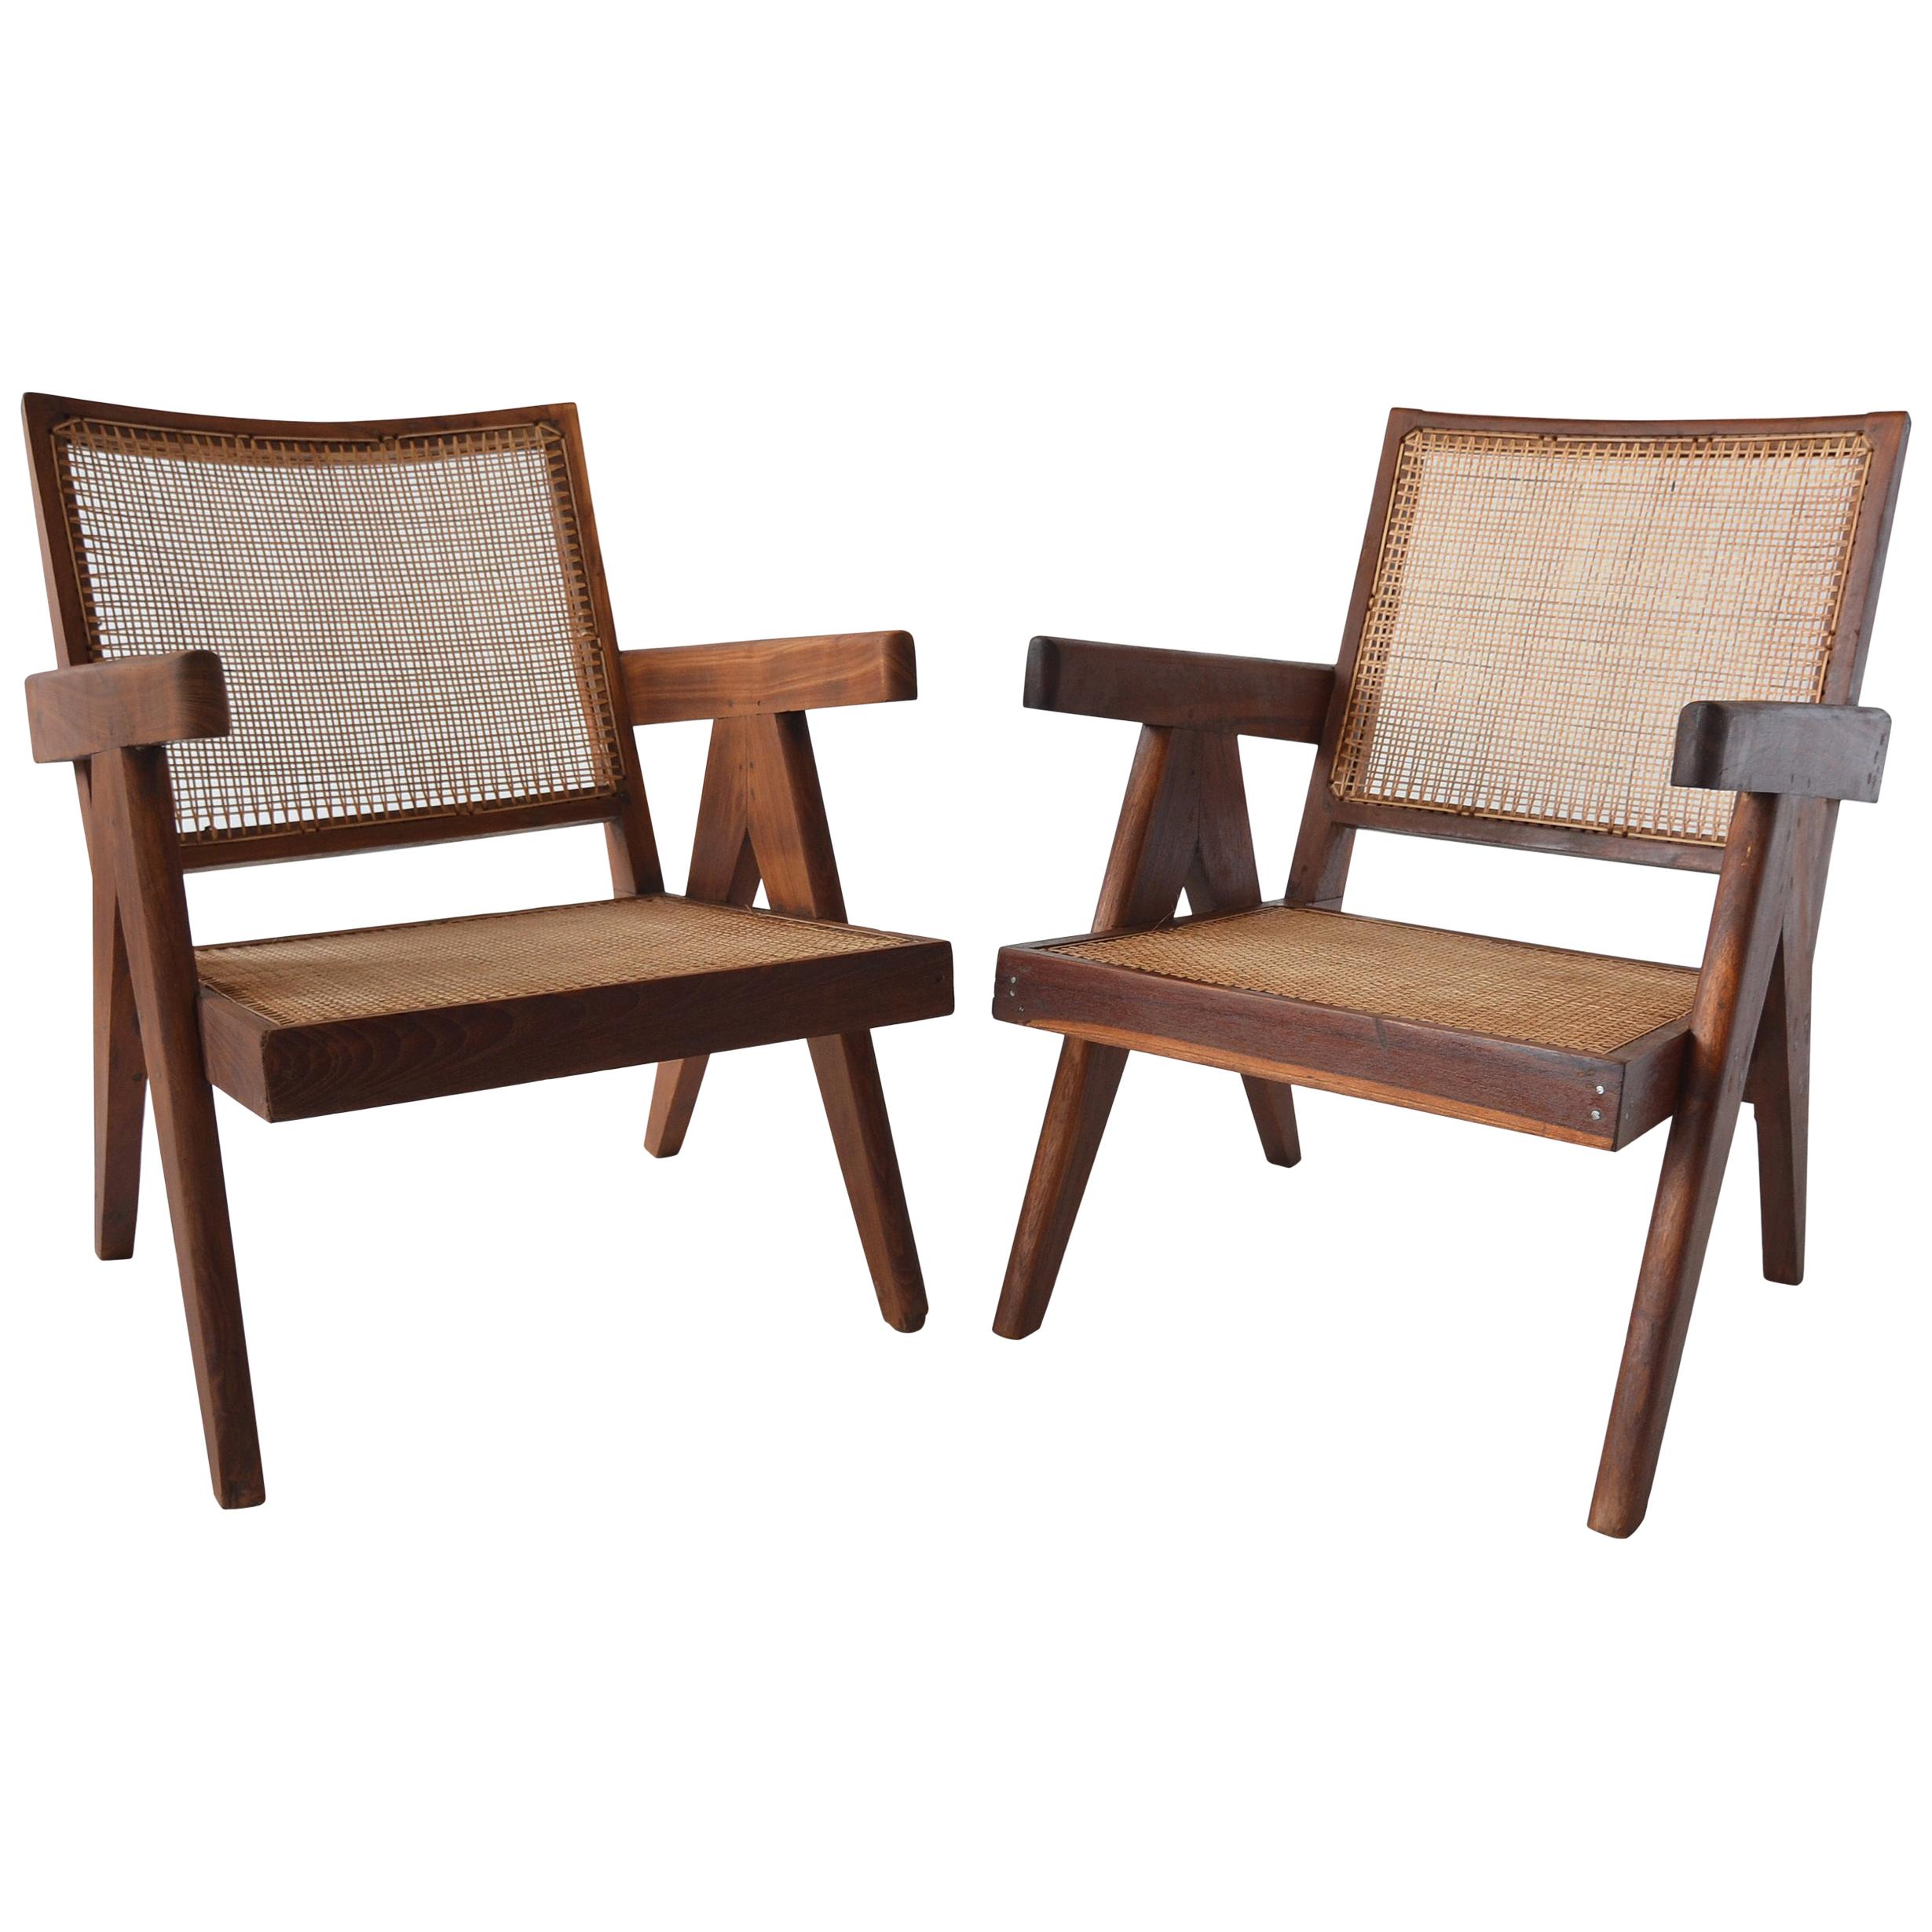 Pair of Pierre Jeanneret Low Chairs